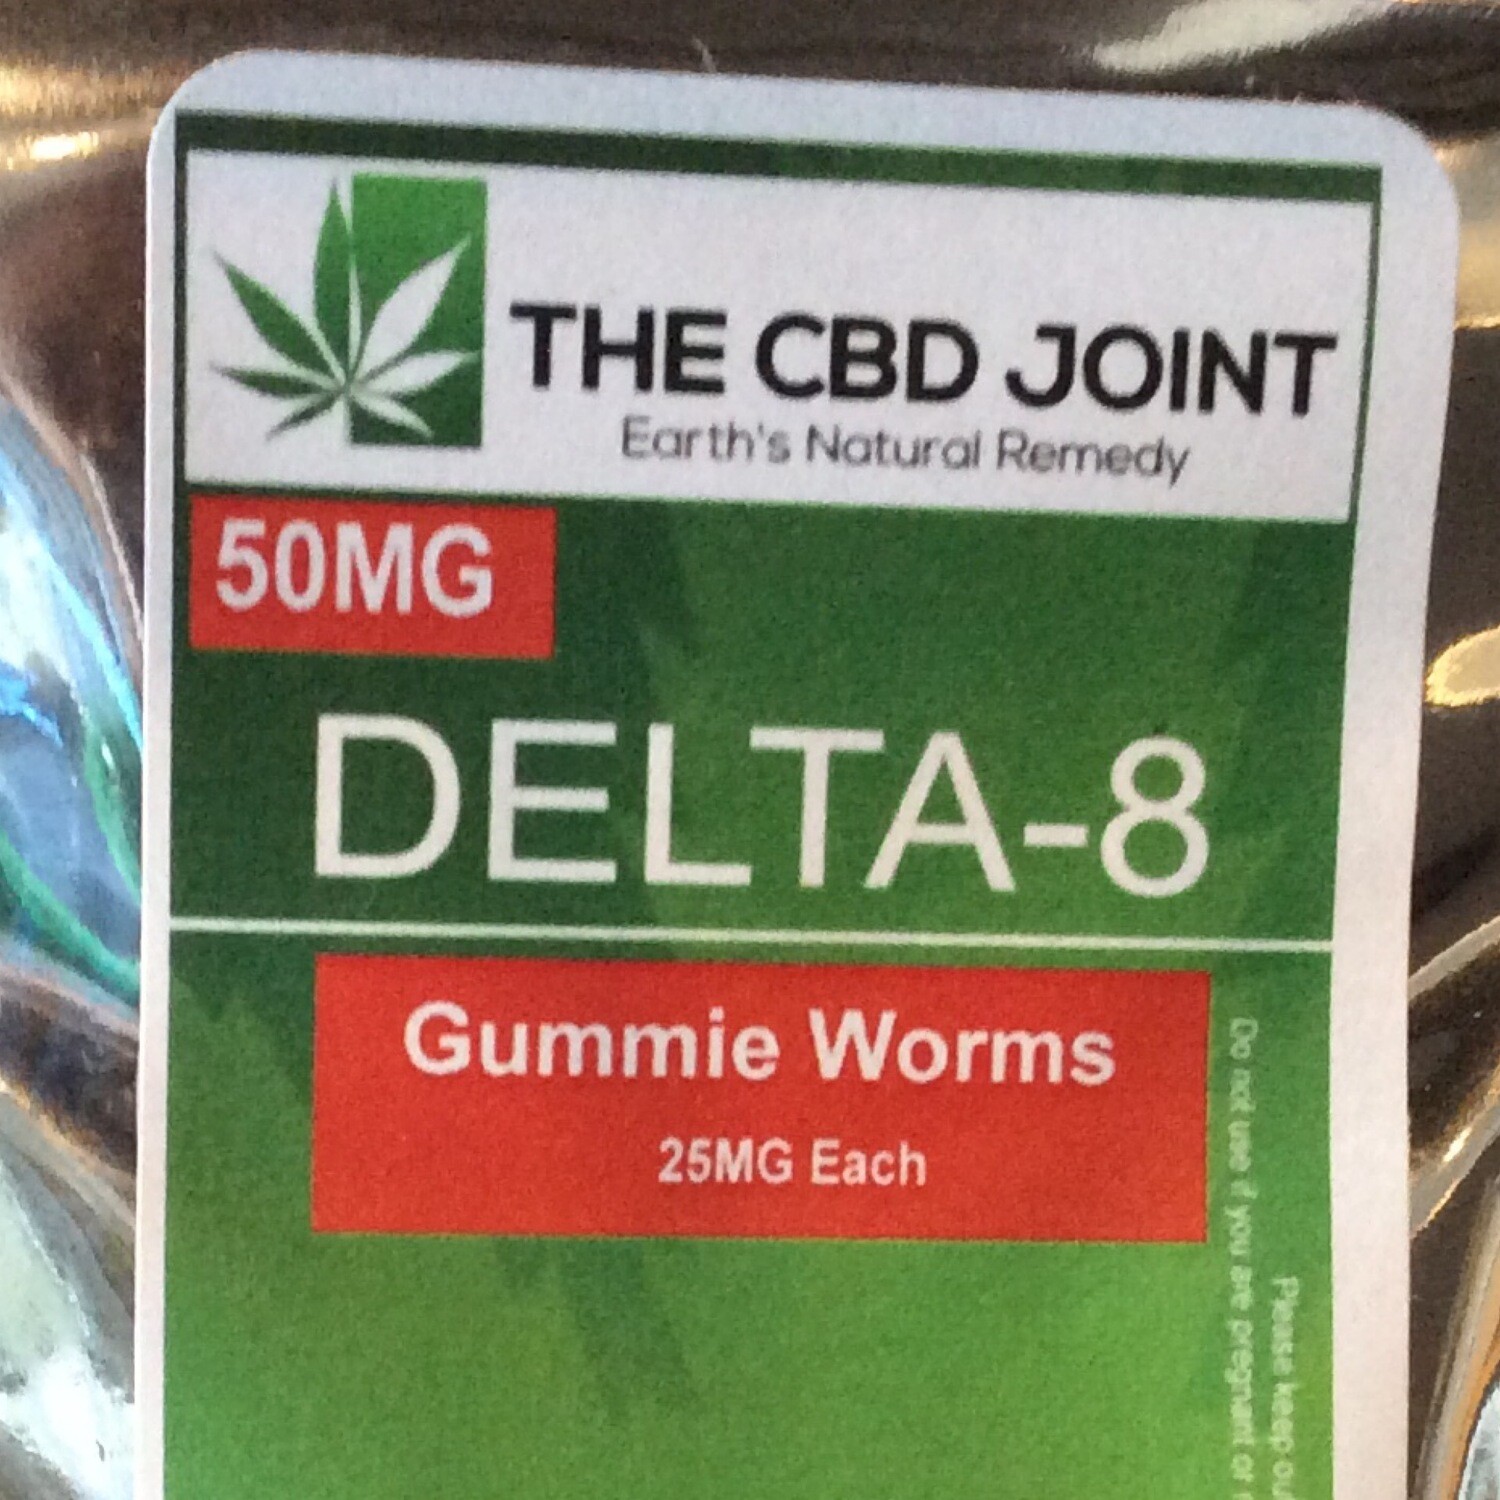 Sample delta 8 worms